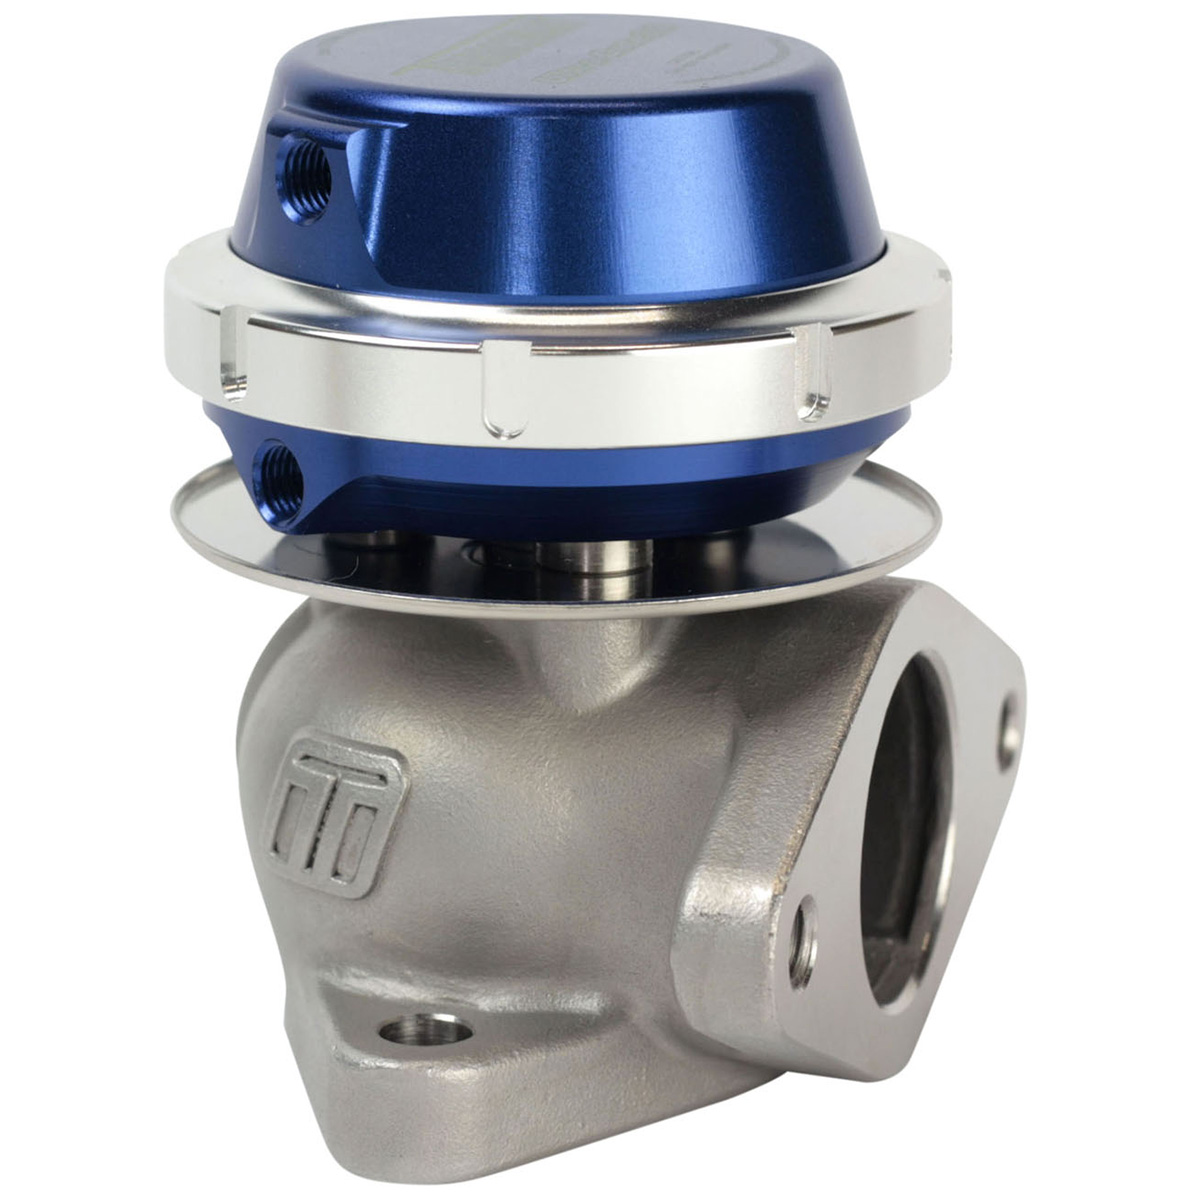 Wastegate Flange Ultra gate 38 1/2 thick threaded